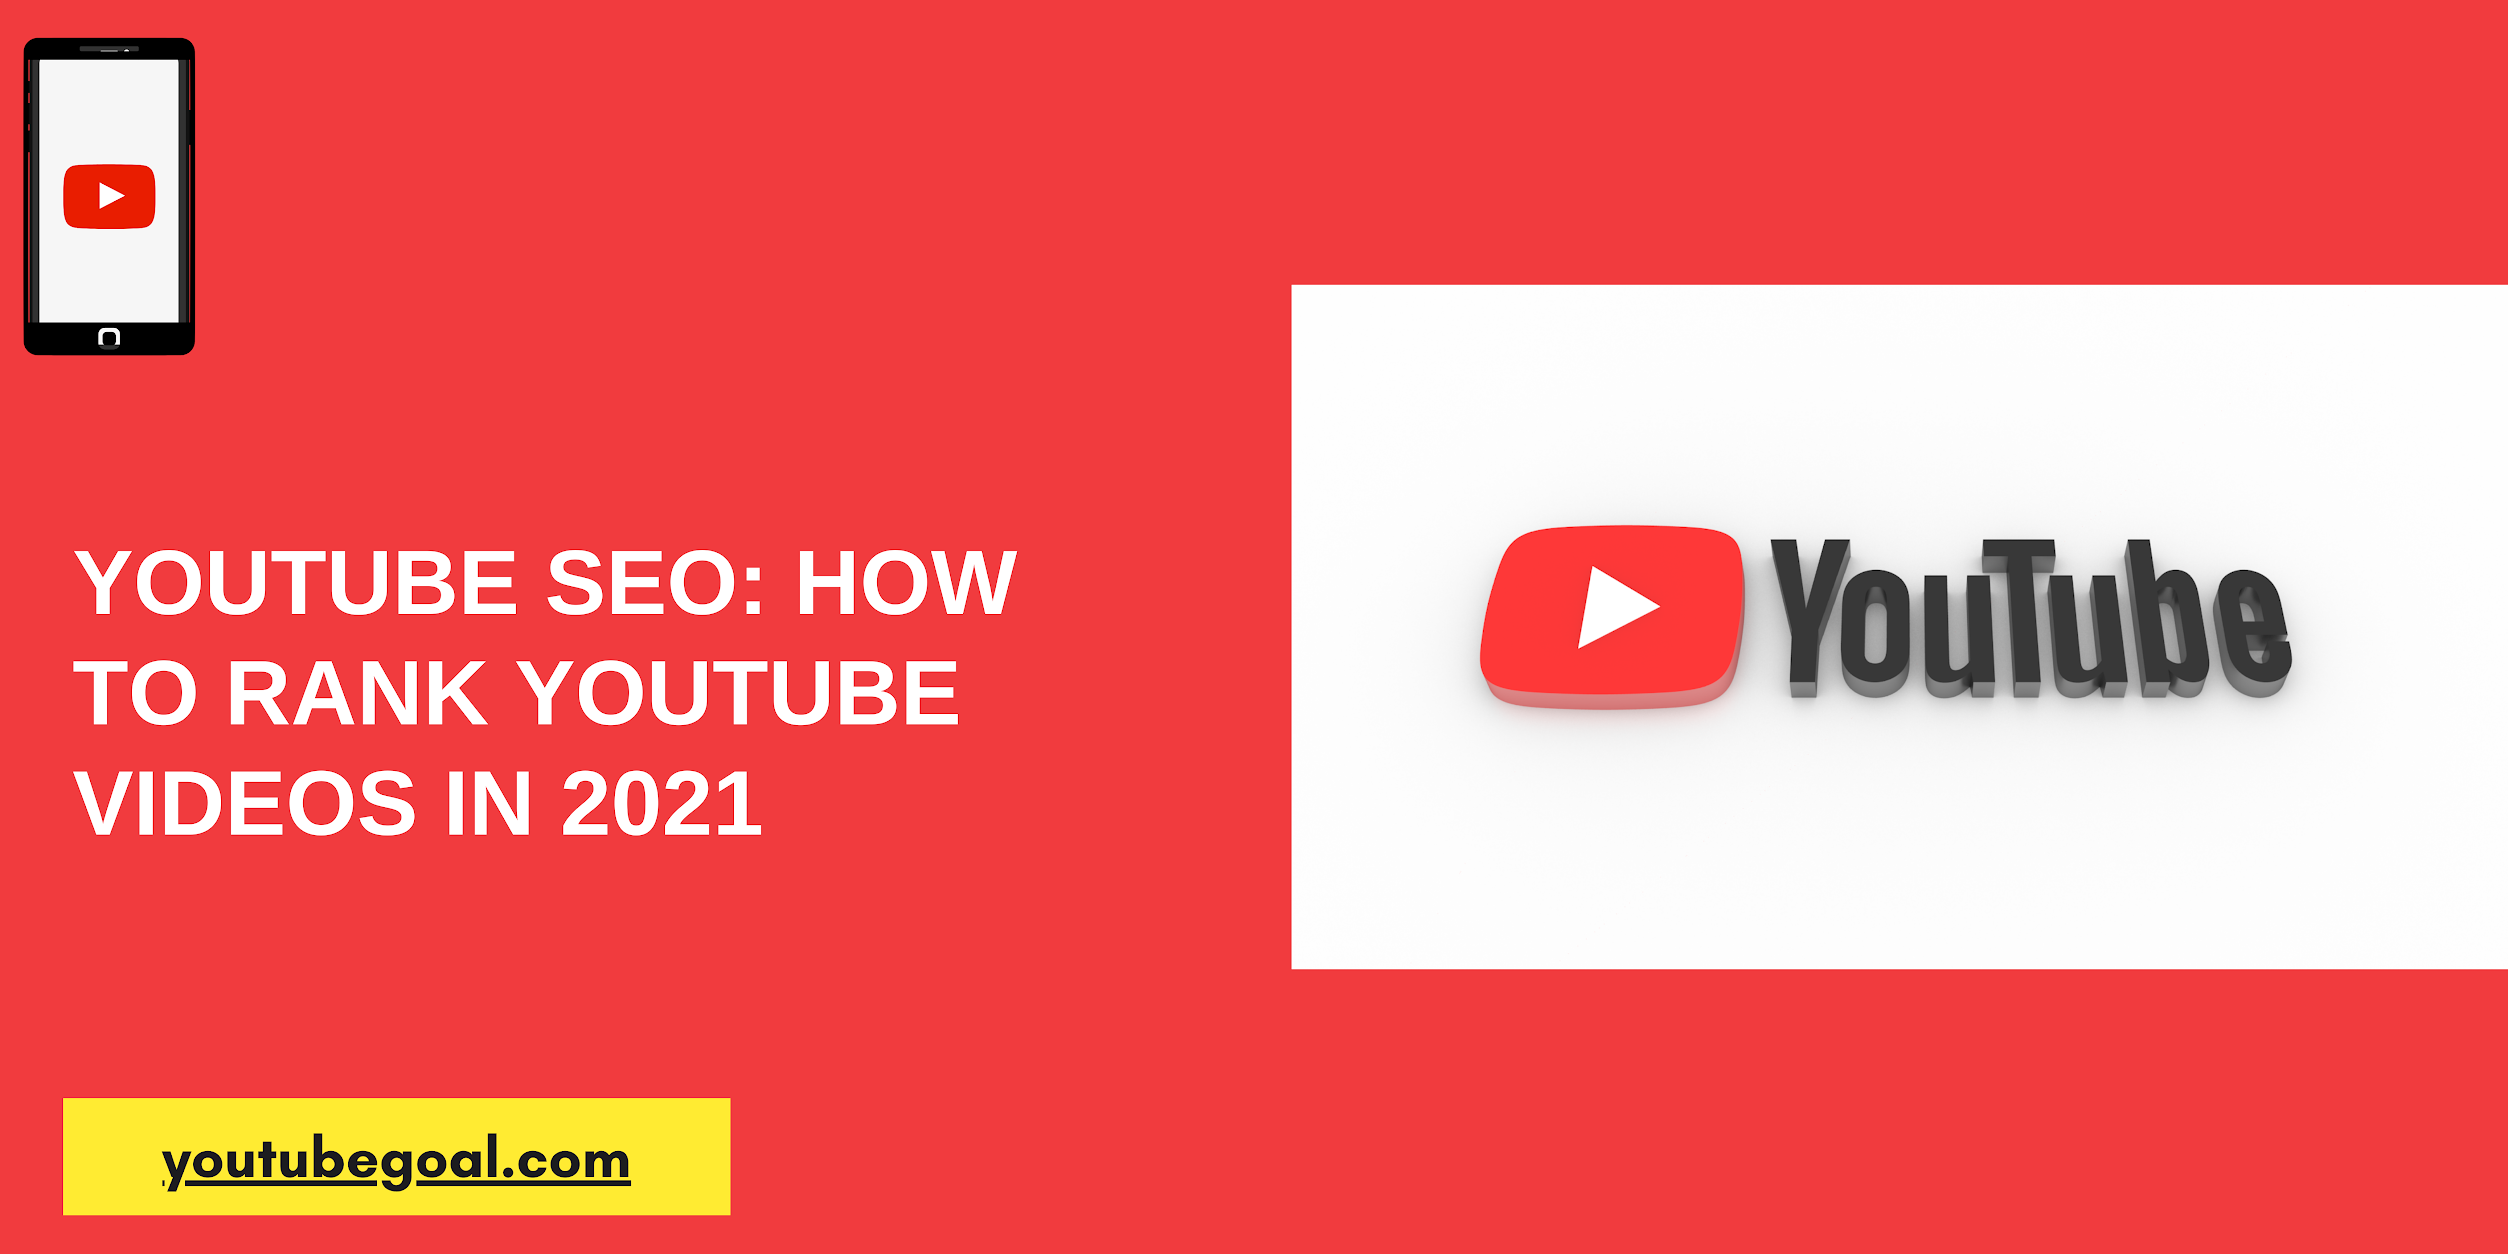 YouTube SEO: How to Rank YouTube Videos in 2021 (Tips and Tricks)